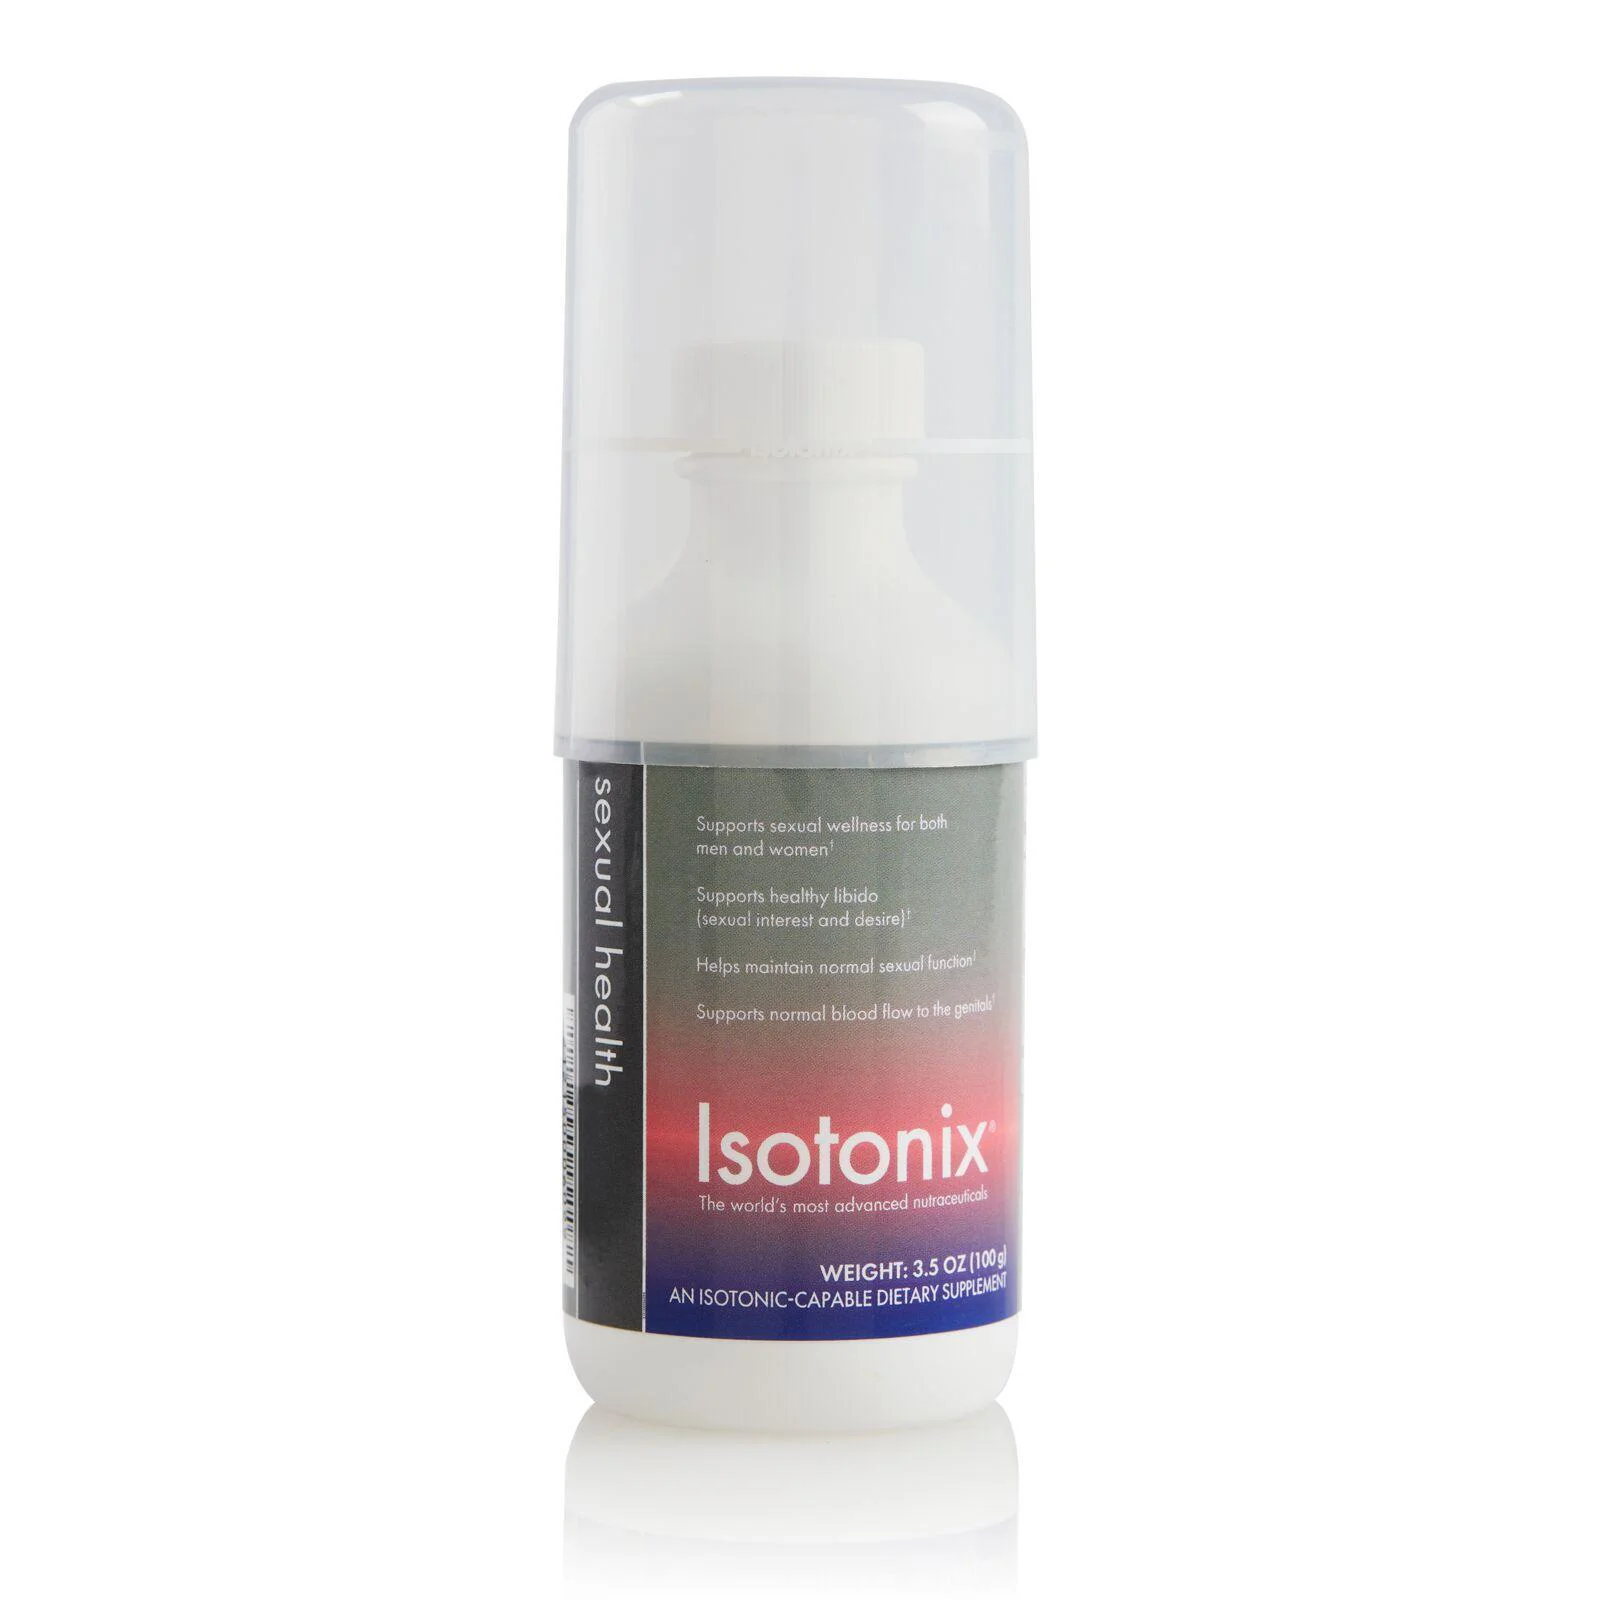 Purchase Isotonix Sexual Health